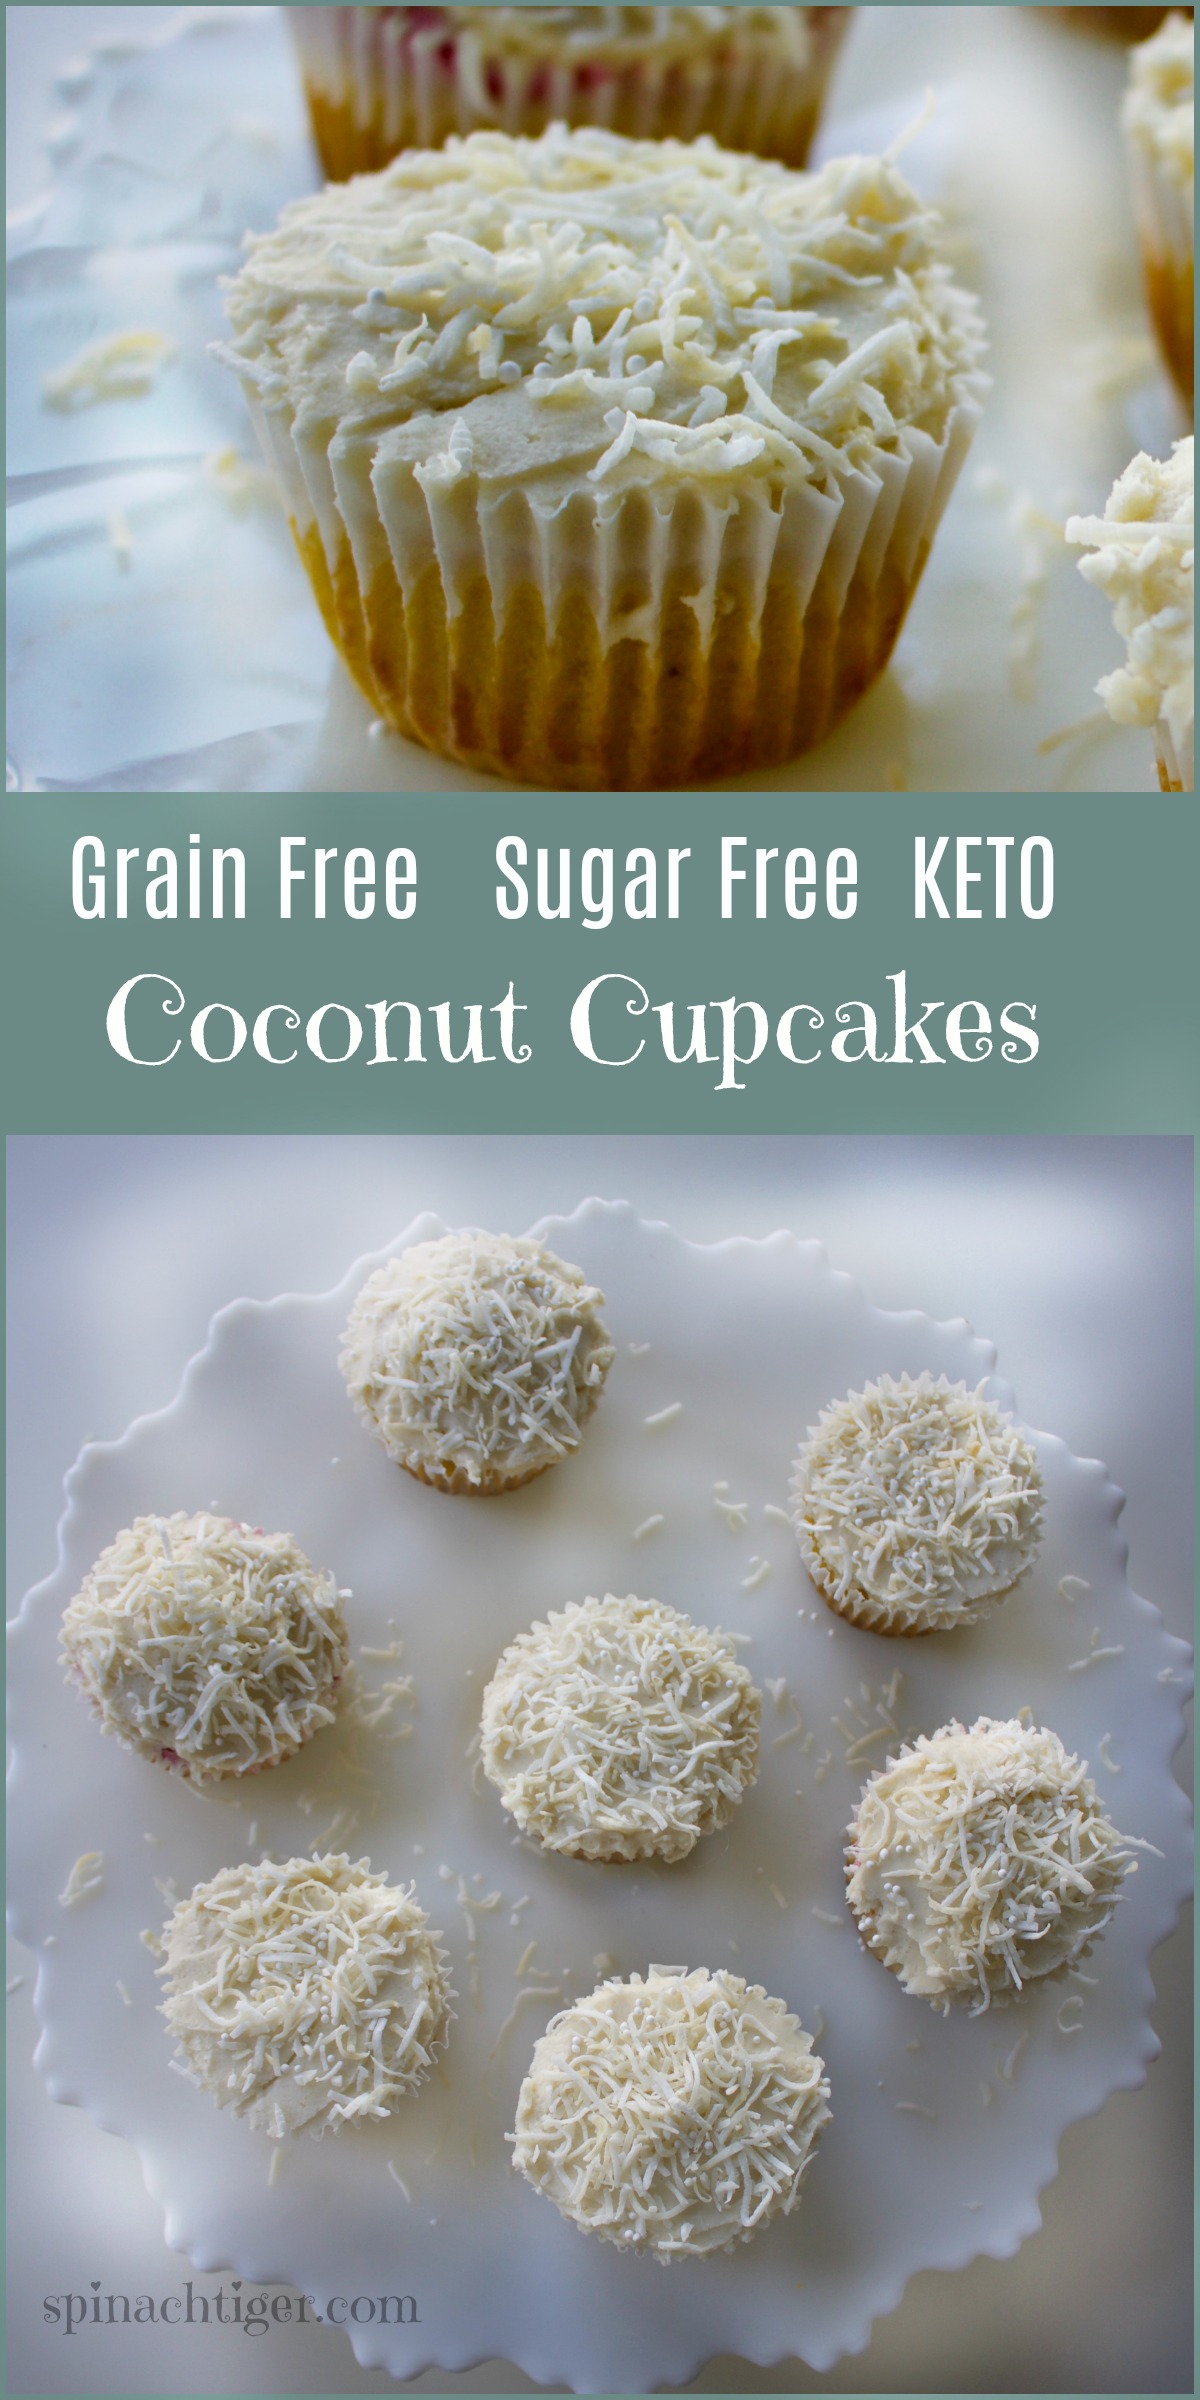 How to Make Grain Free Coconut Cupcakes, Keto, Low Carb from Spinach Tiger